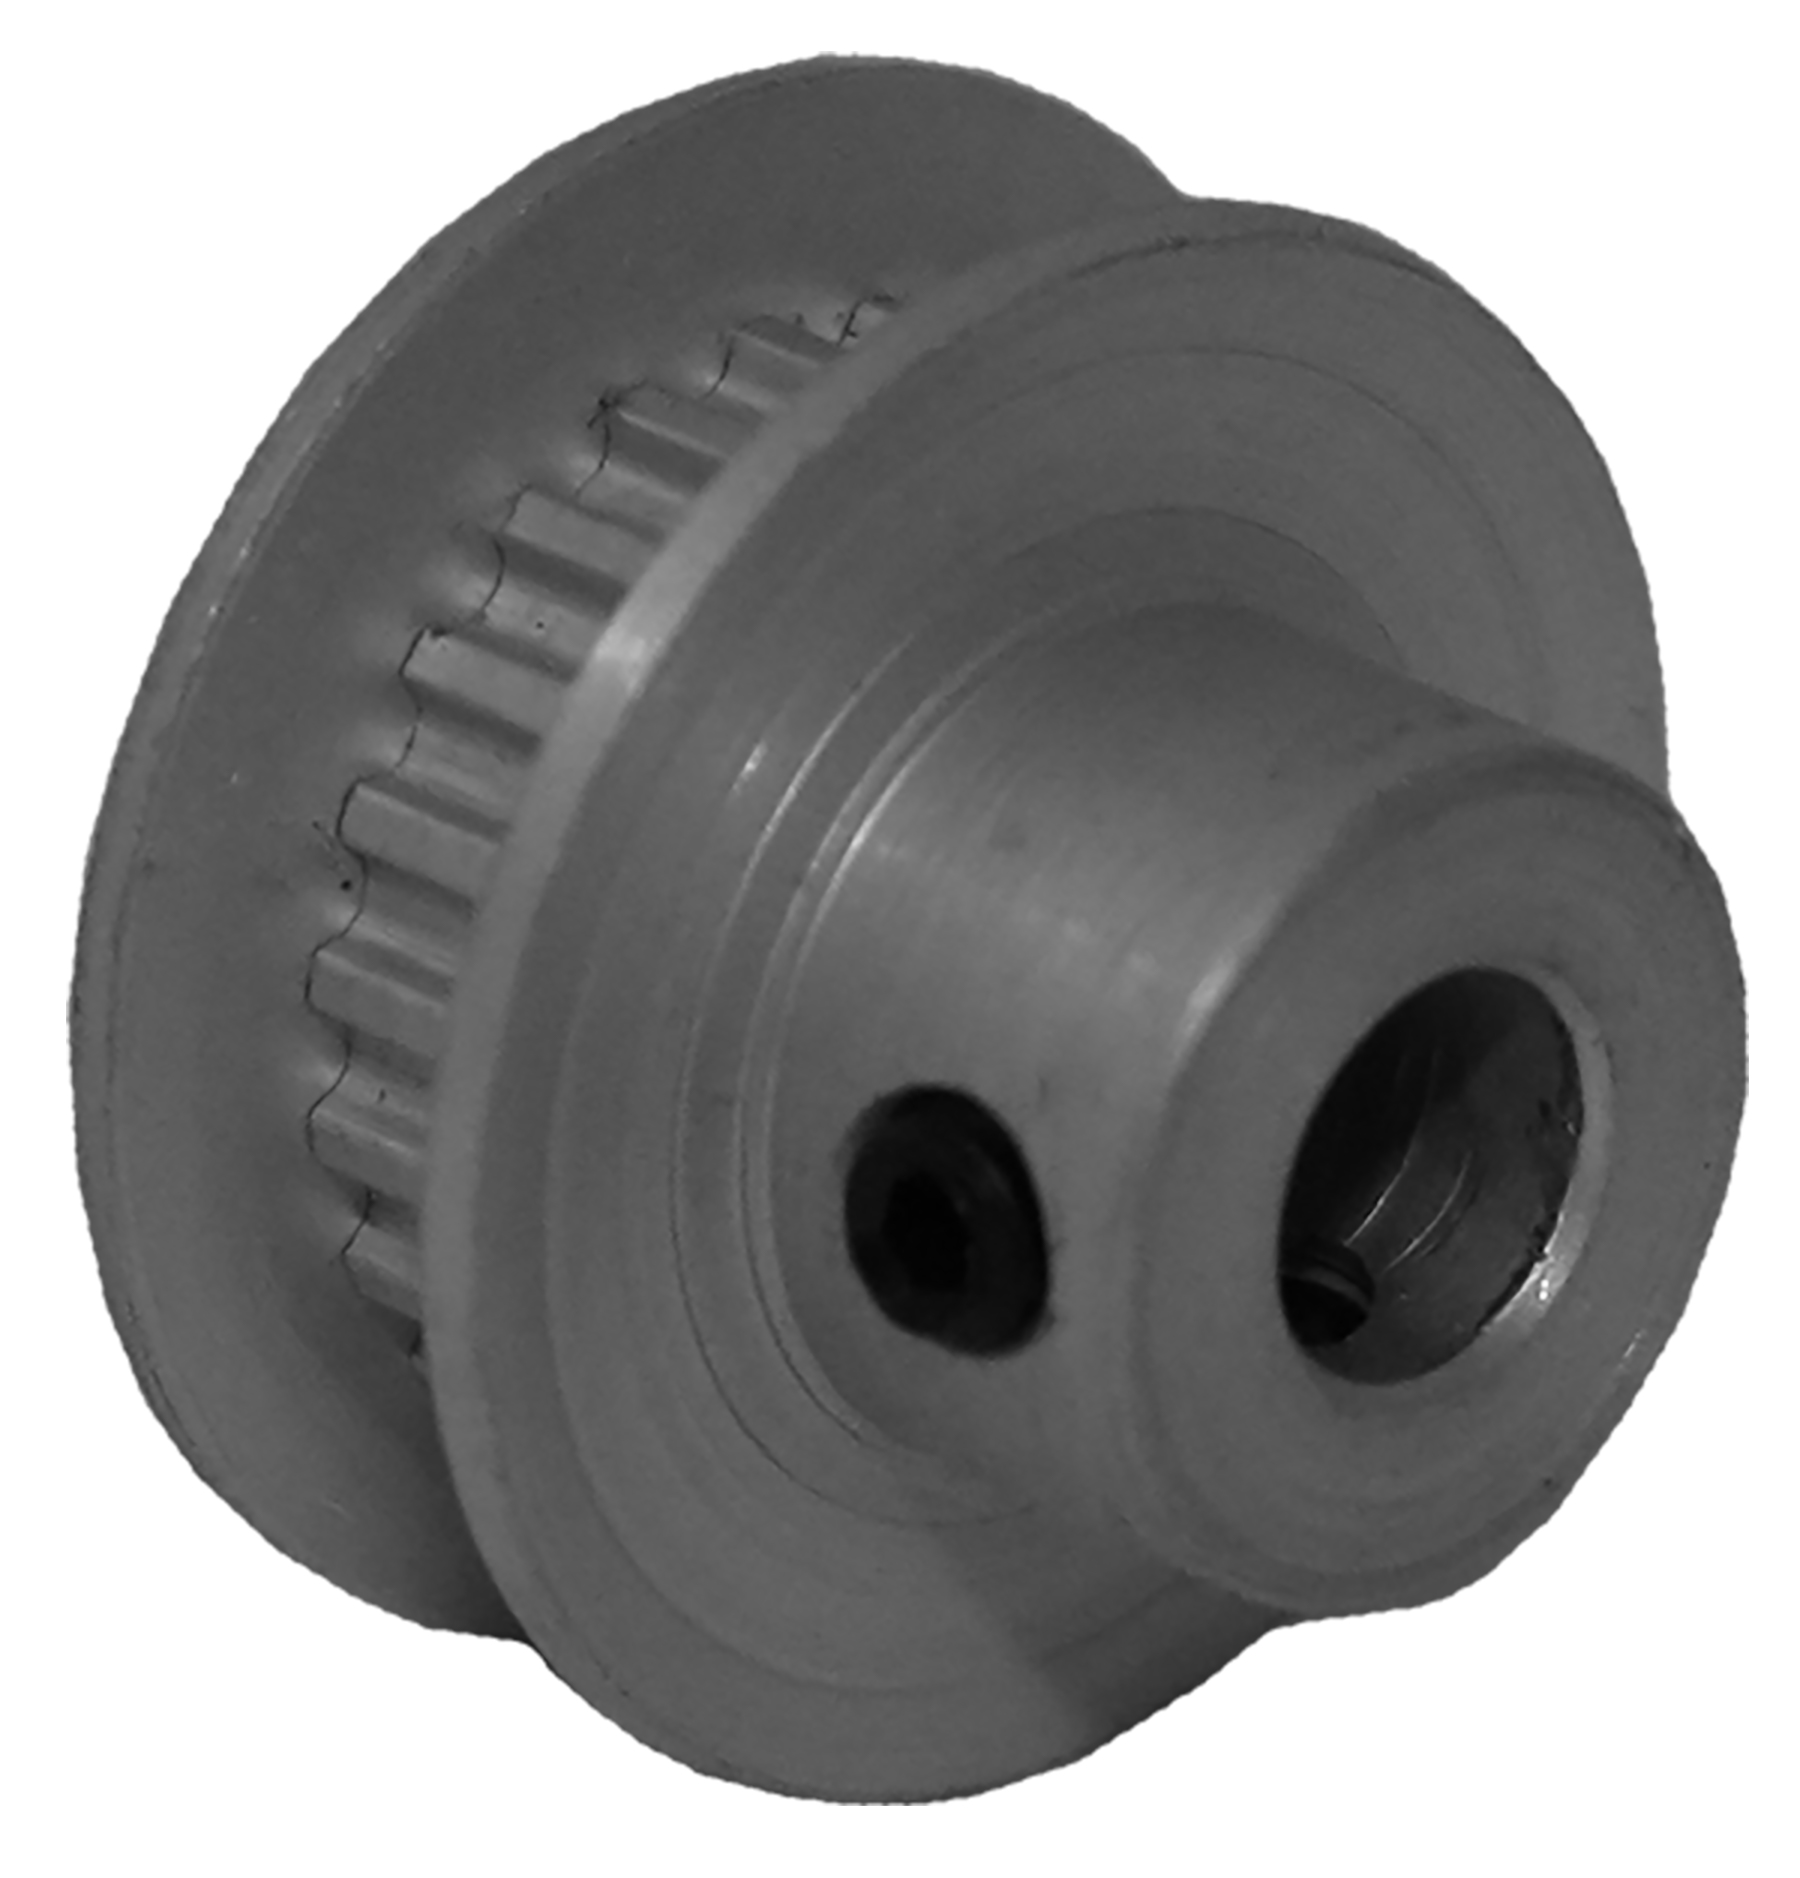 22MP012-6FA2 - Aluminum Imperial Pitch Pulleys